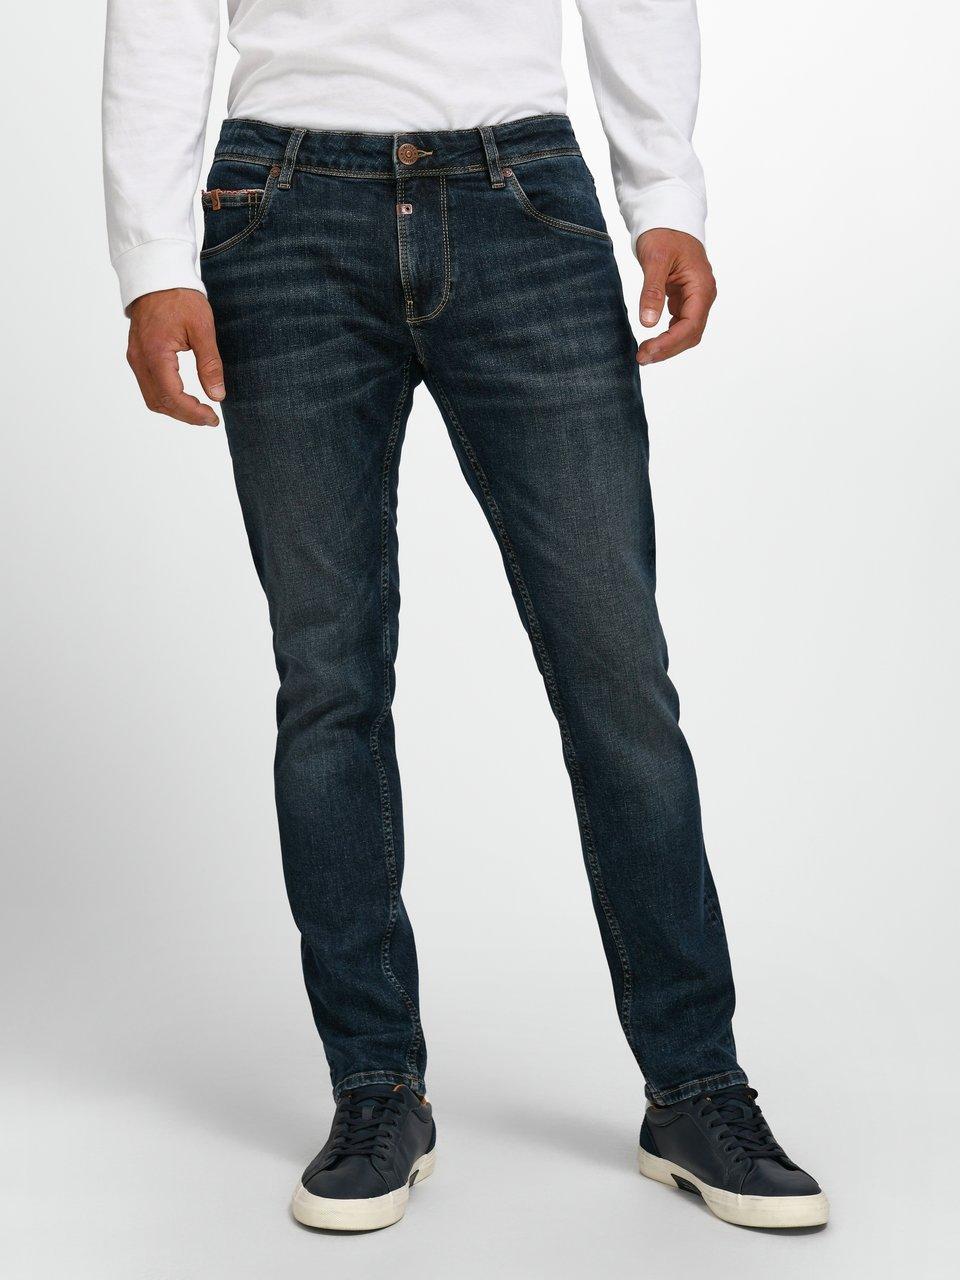 Timezone - Jeans in inch-lengte - donkerblauw